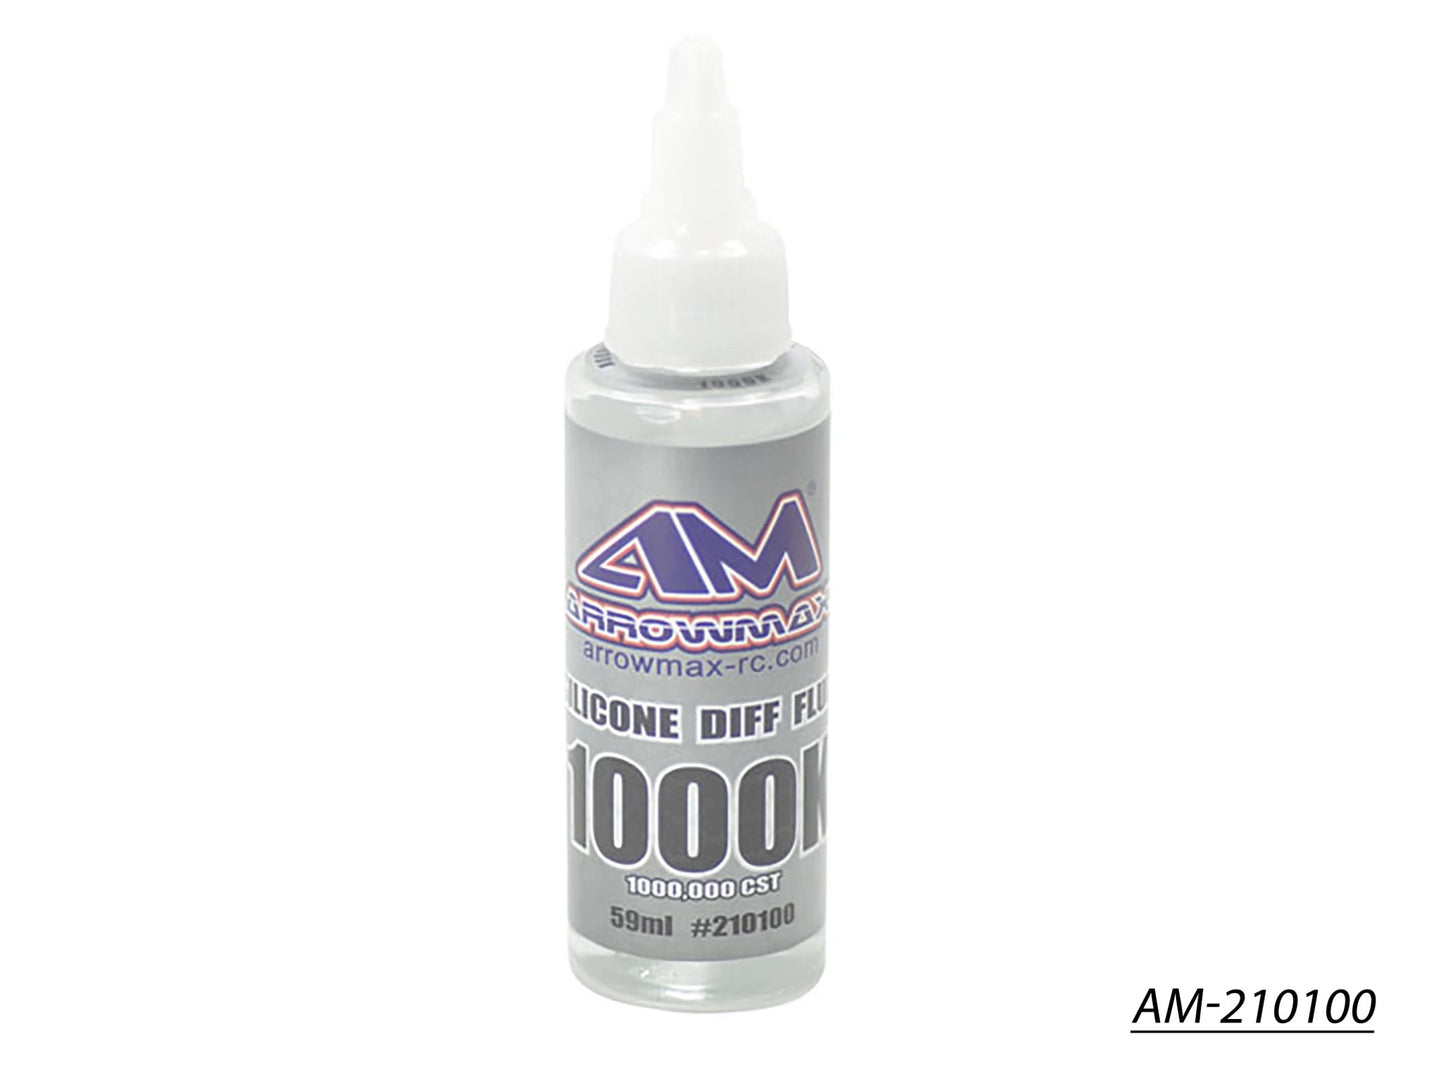 Silicone Diff Fluid 59ml 1000.000cst (AM-210100)